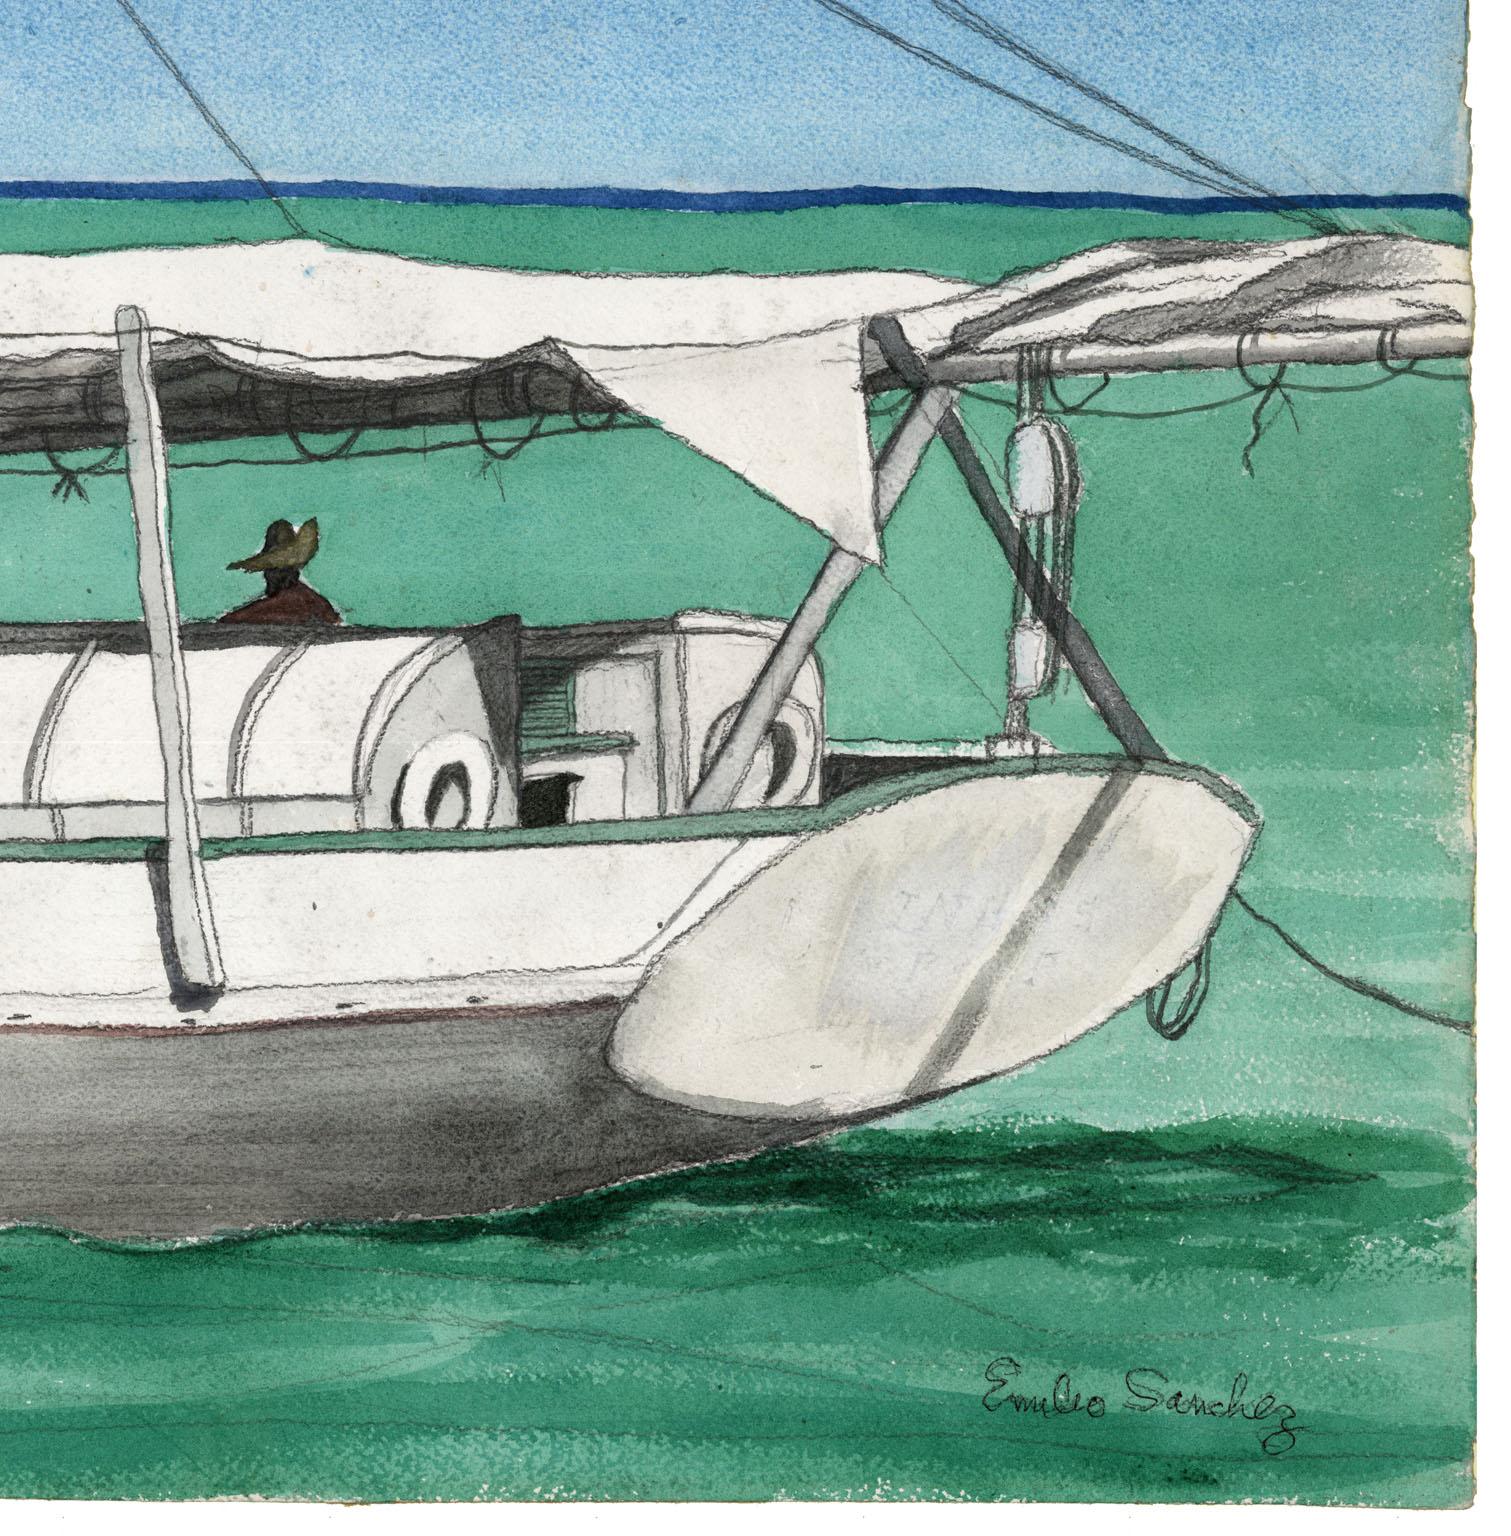 Emilio Sanchez (1921-1999) created the watercolor entitled “Schooner St. Croix” in 1952.  This piece is signed in pen at the lower right and titled on the verso. The paper size is 16.88 x 22.25 inches.  Stamped on verso 